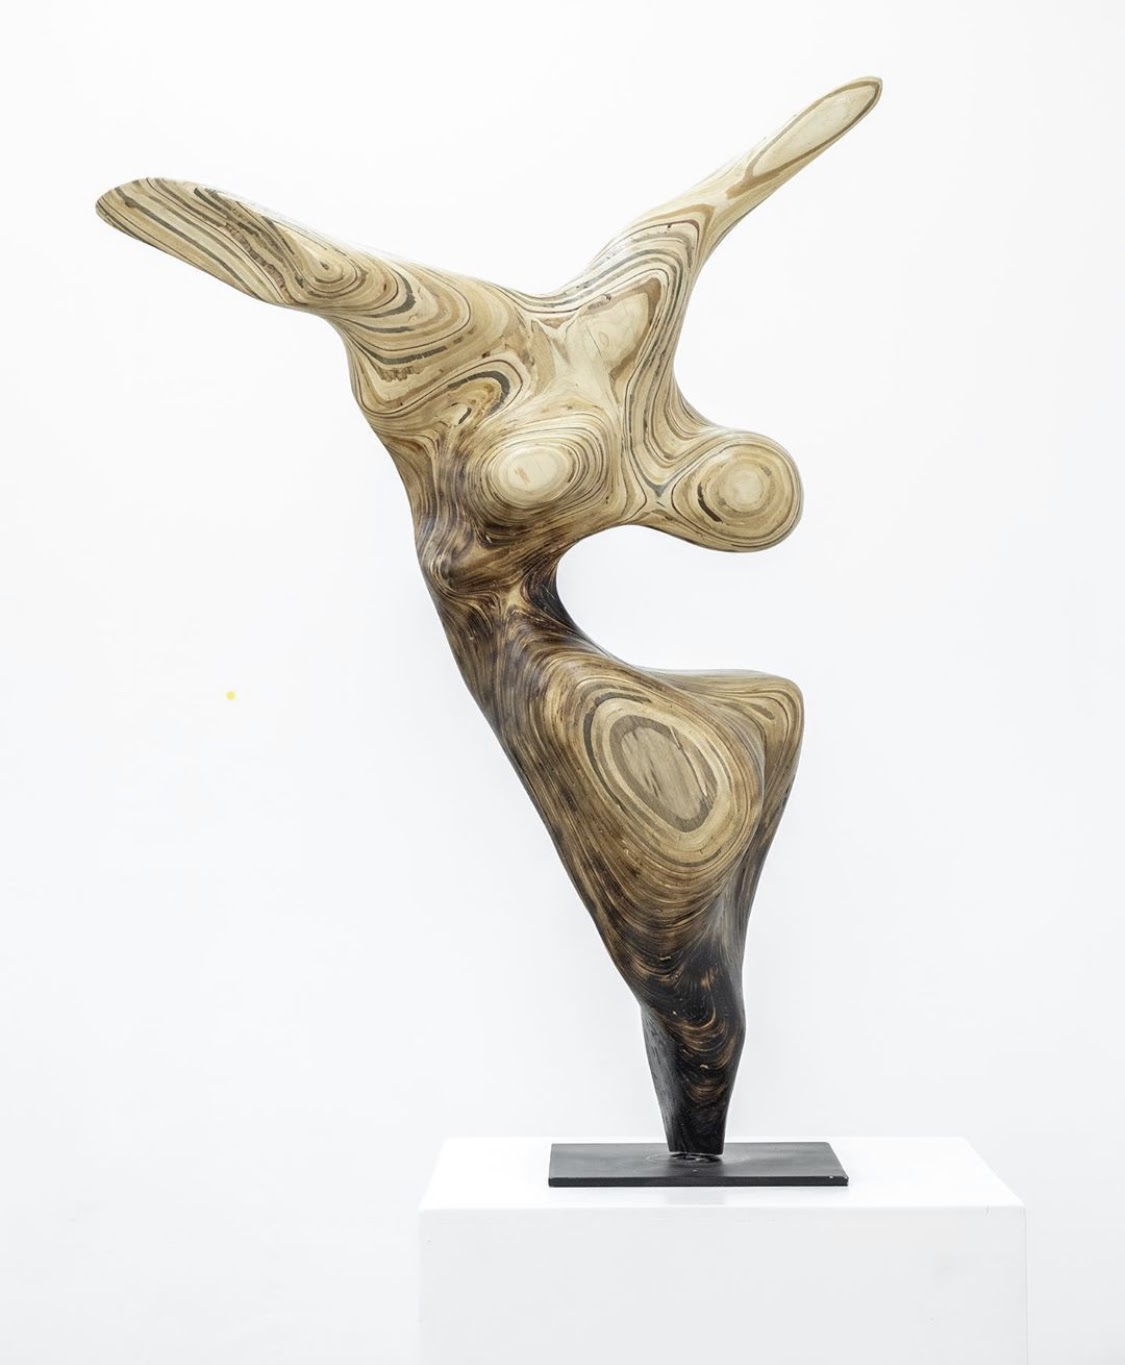 Sculpture made from wood that has two appendages out from it that look like arms and its form encapsulates the artists' intention and namesake--freedom.